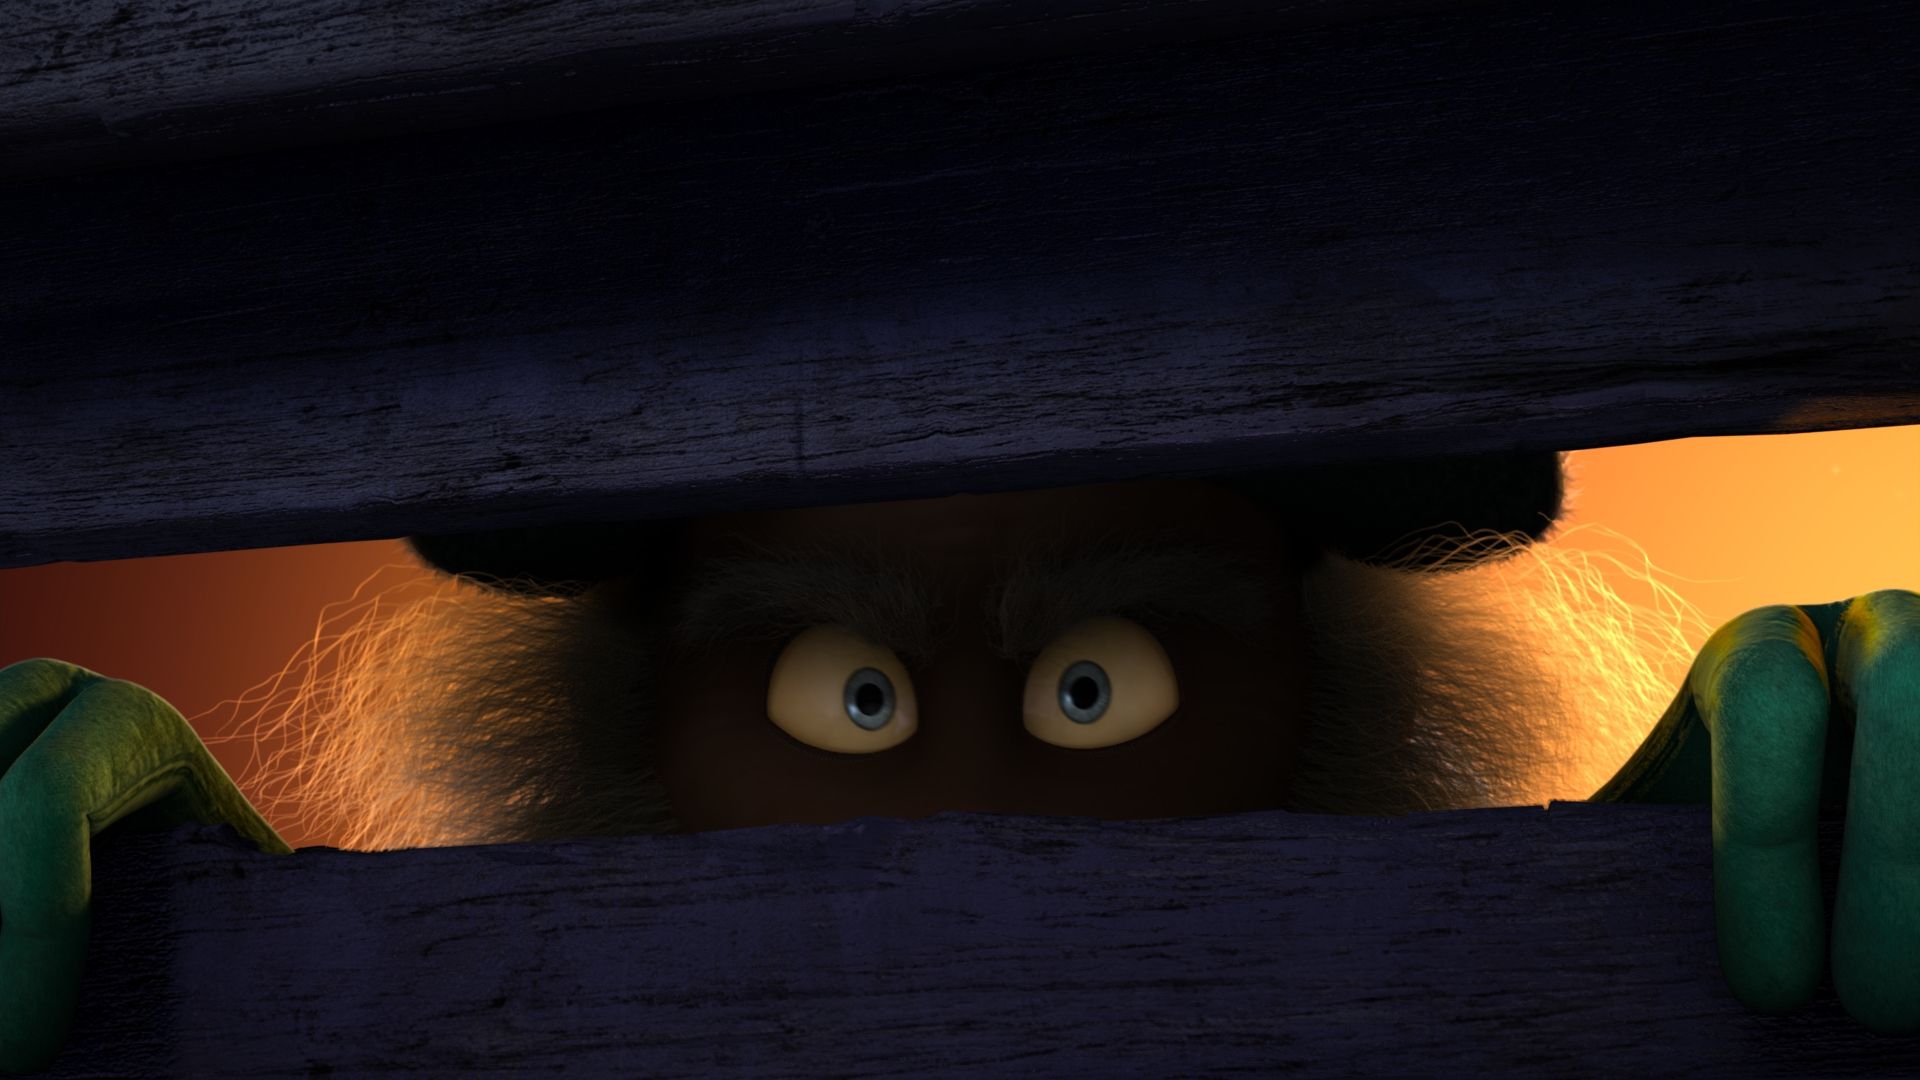 THE LORAX Movie Trailer and Images